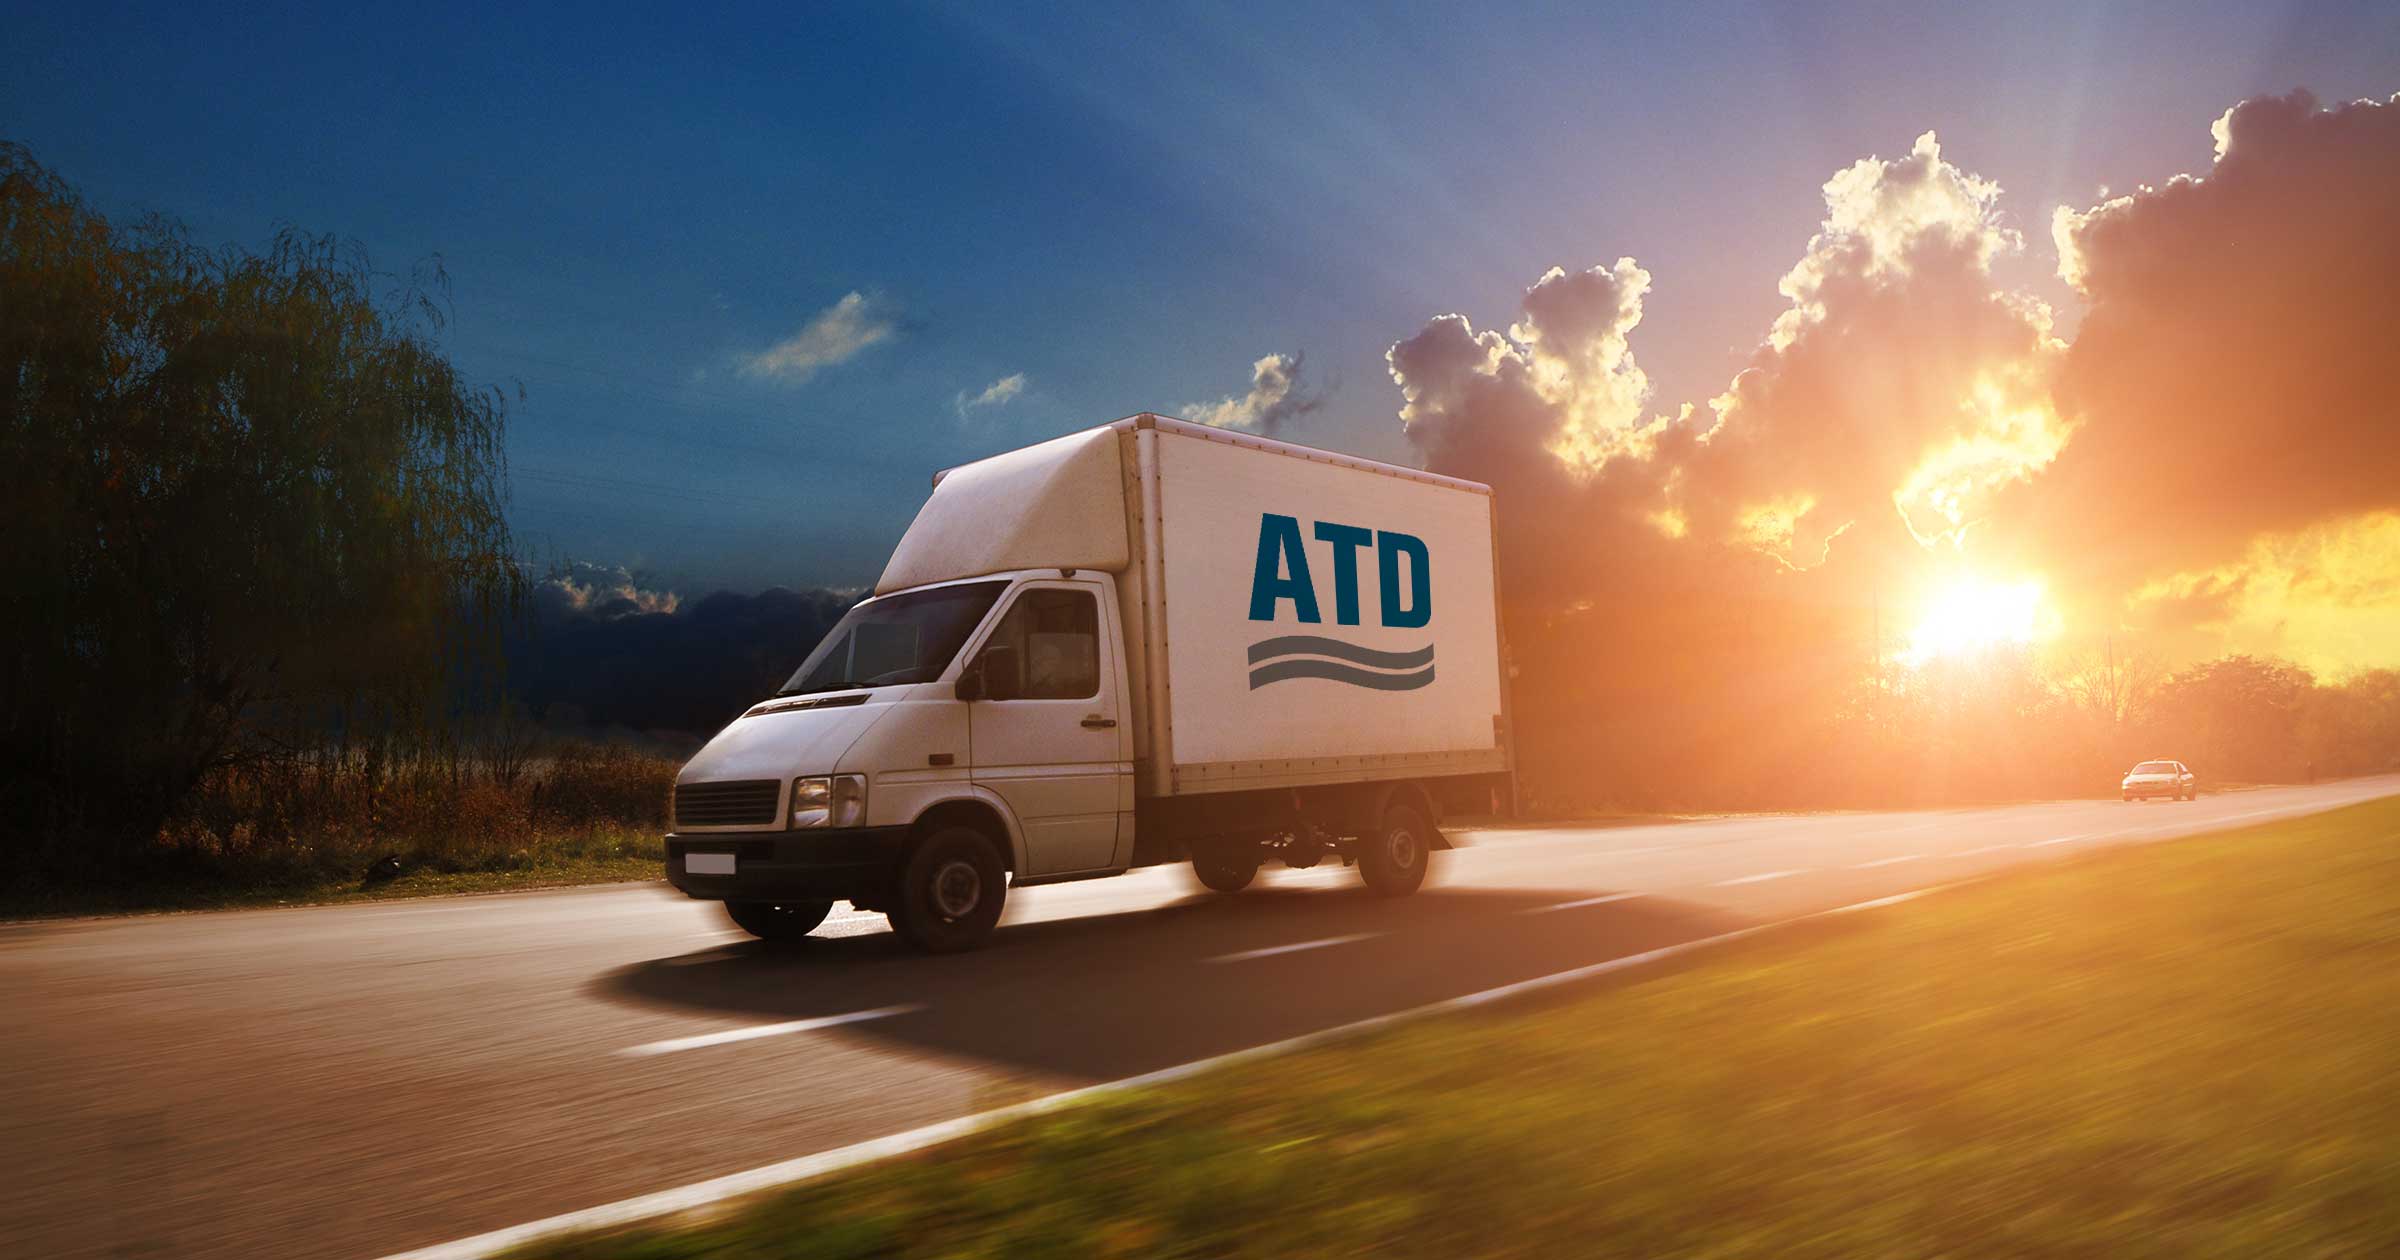 A commercial box truck drives on the highway at sunset